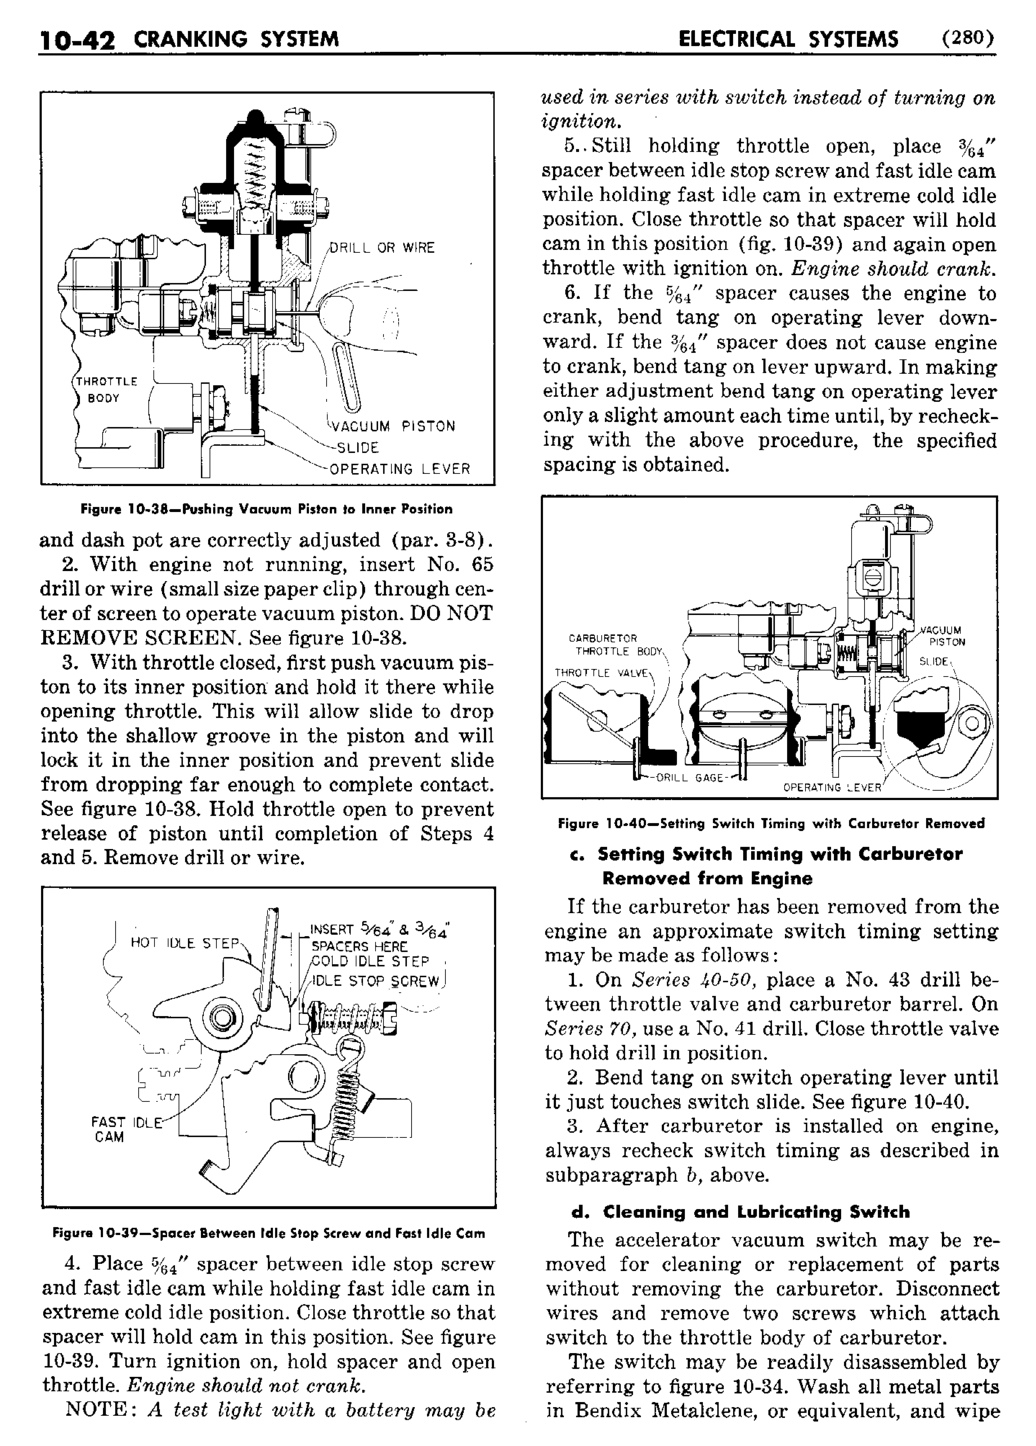 n_11 1950 Buick Shop Manual - Electrical Systems-042-042.jpg